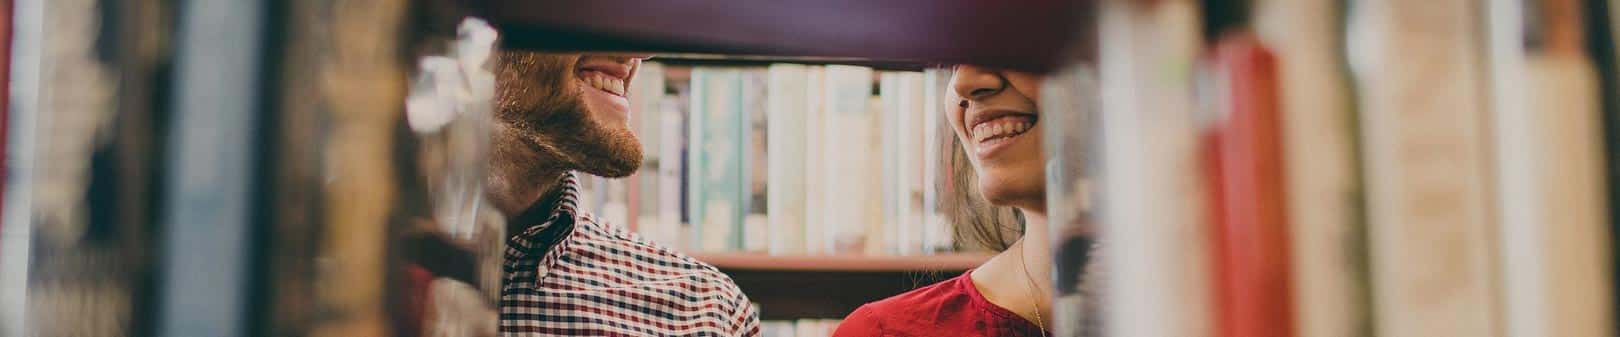 Couple in library smiling